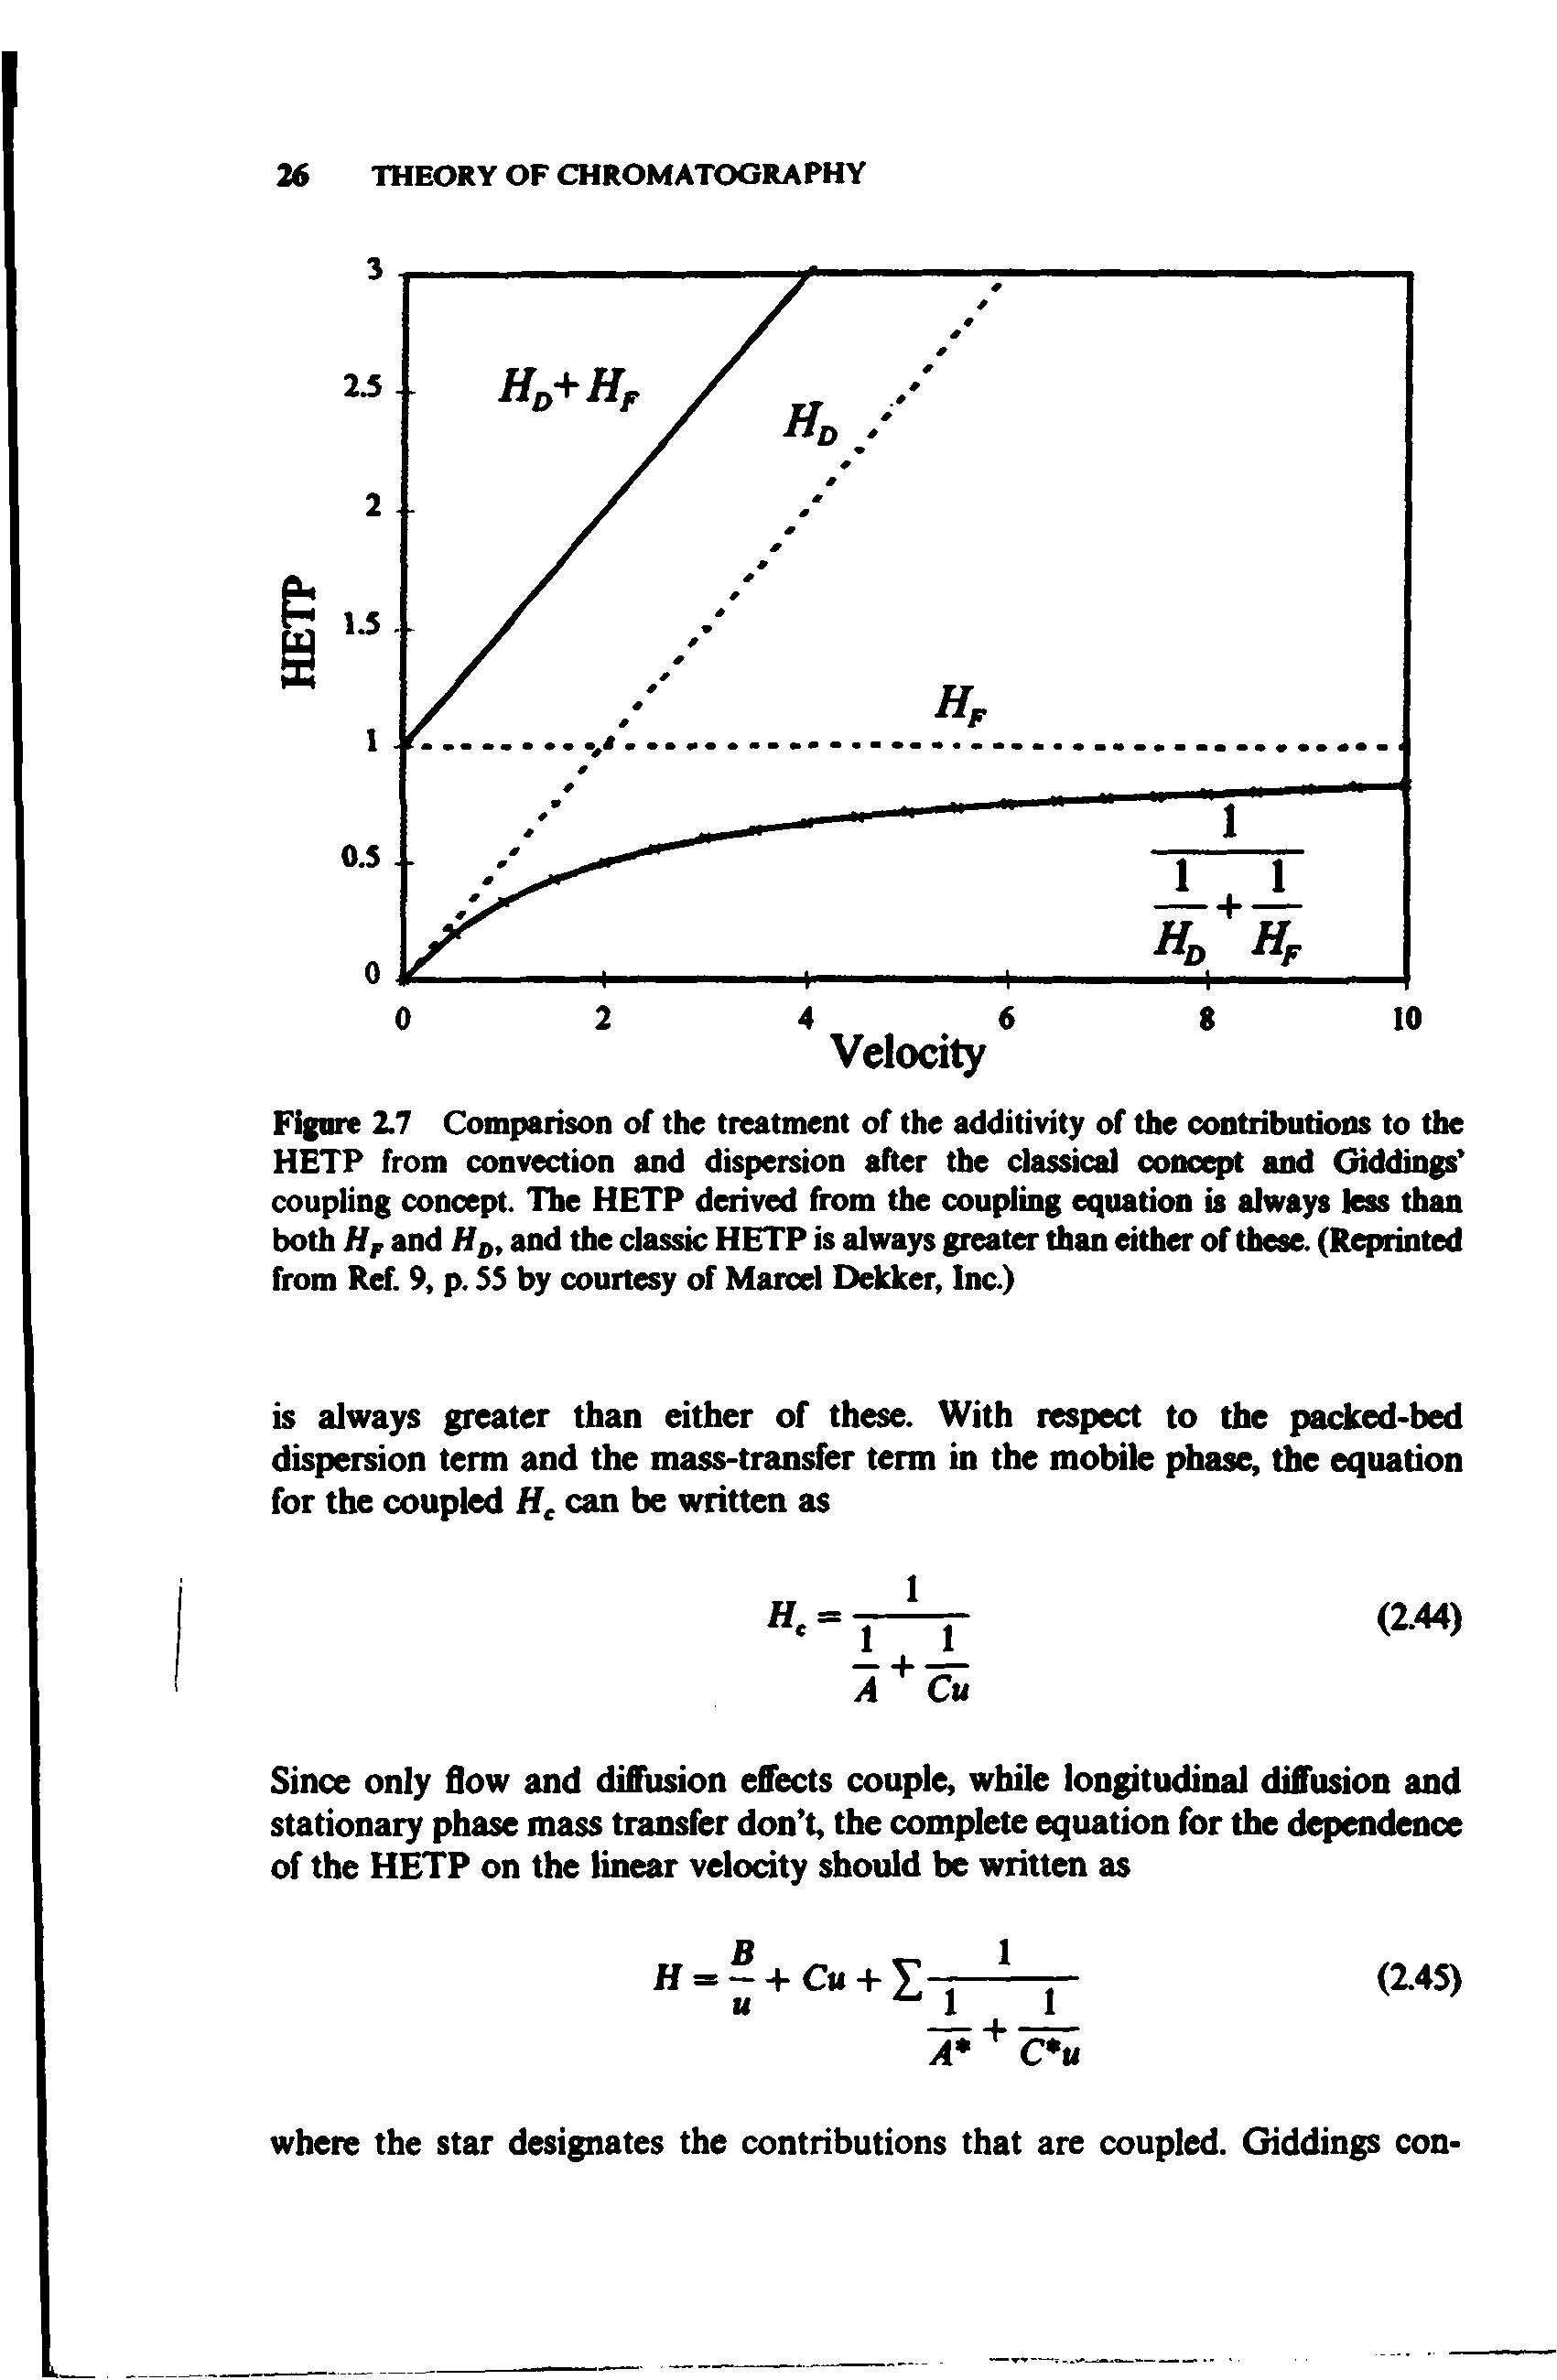 Figure 2.7 Comparison of the treatment of the additivity of the contributioos to the HETP from convection and dispersion after the dasrical ooncqit and Giddings coupling concept. The HETP derived from the coupling equation is always less than both/f, and Afo, and the dassk HETP is always greater than either of these. (Rquinted from Ref. 9, p. SS by courtesy of Mated Dekker, Inc.)...